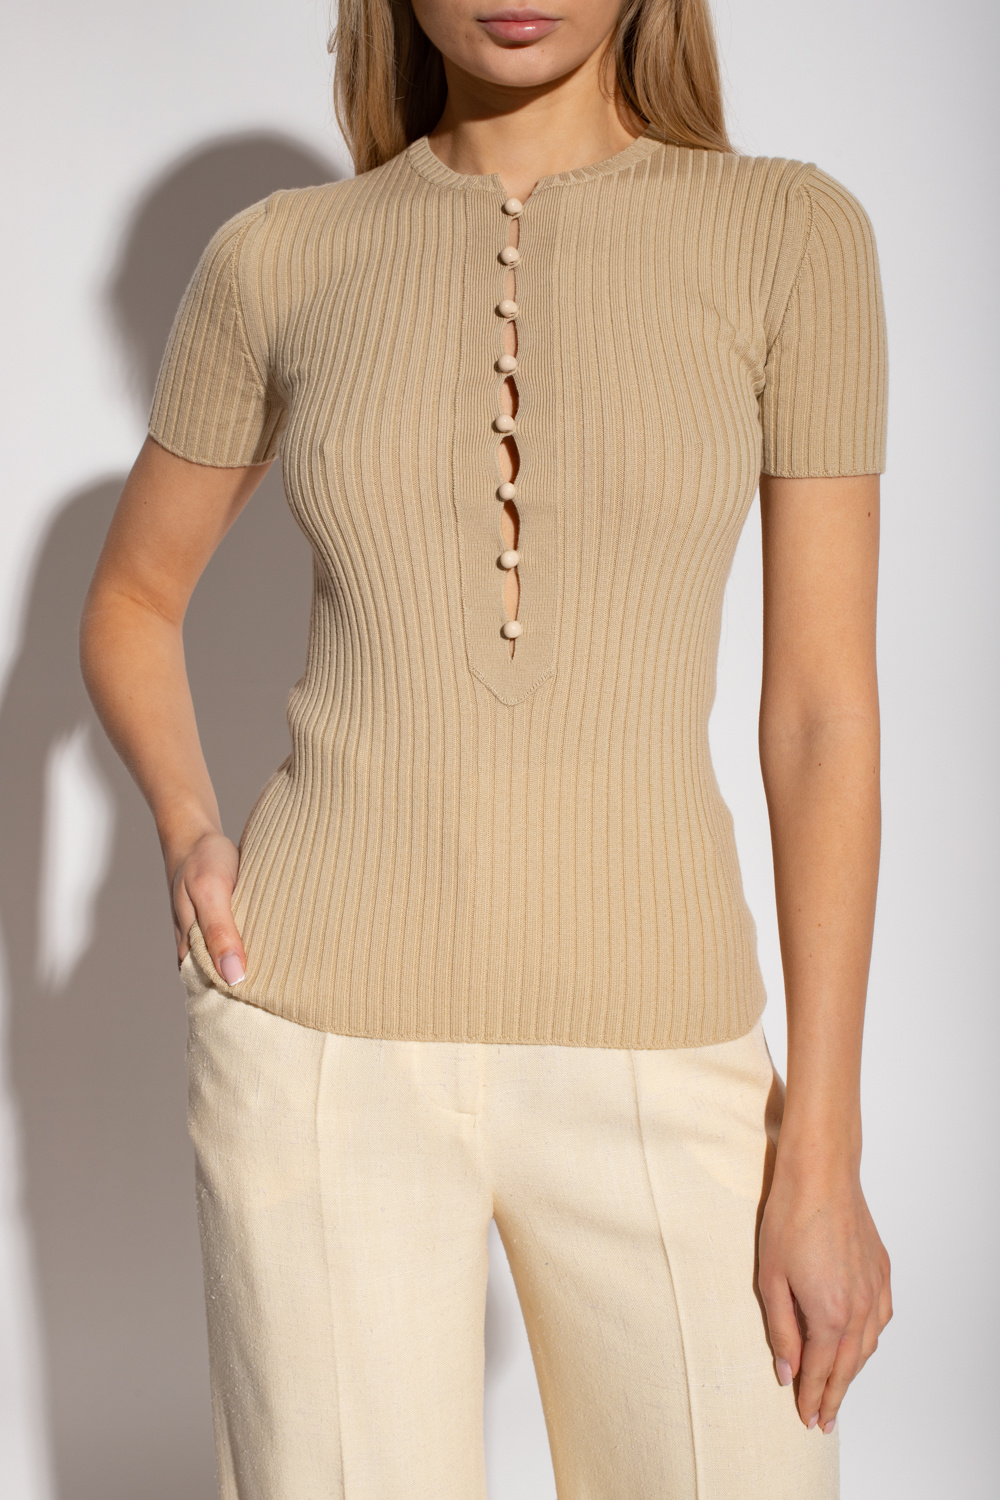 Chloé Fitted top